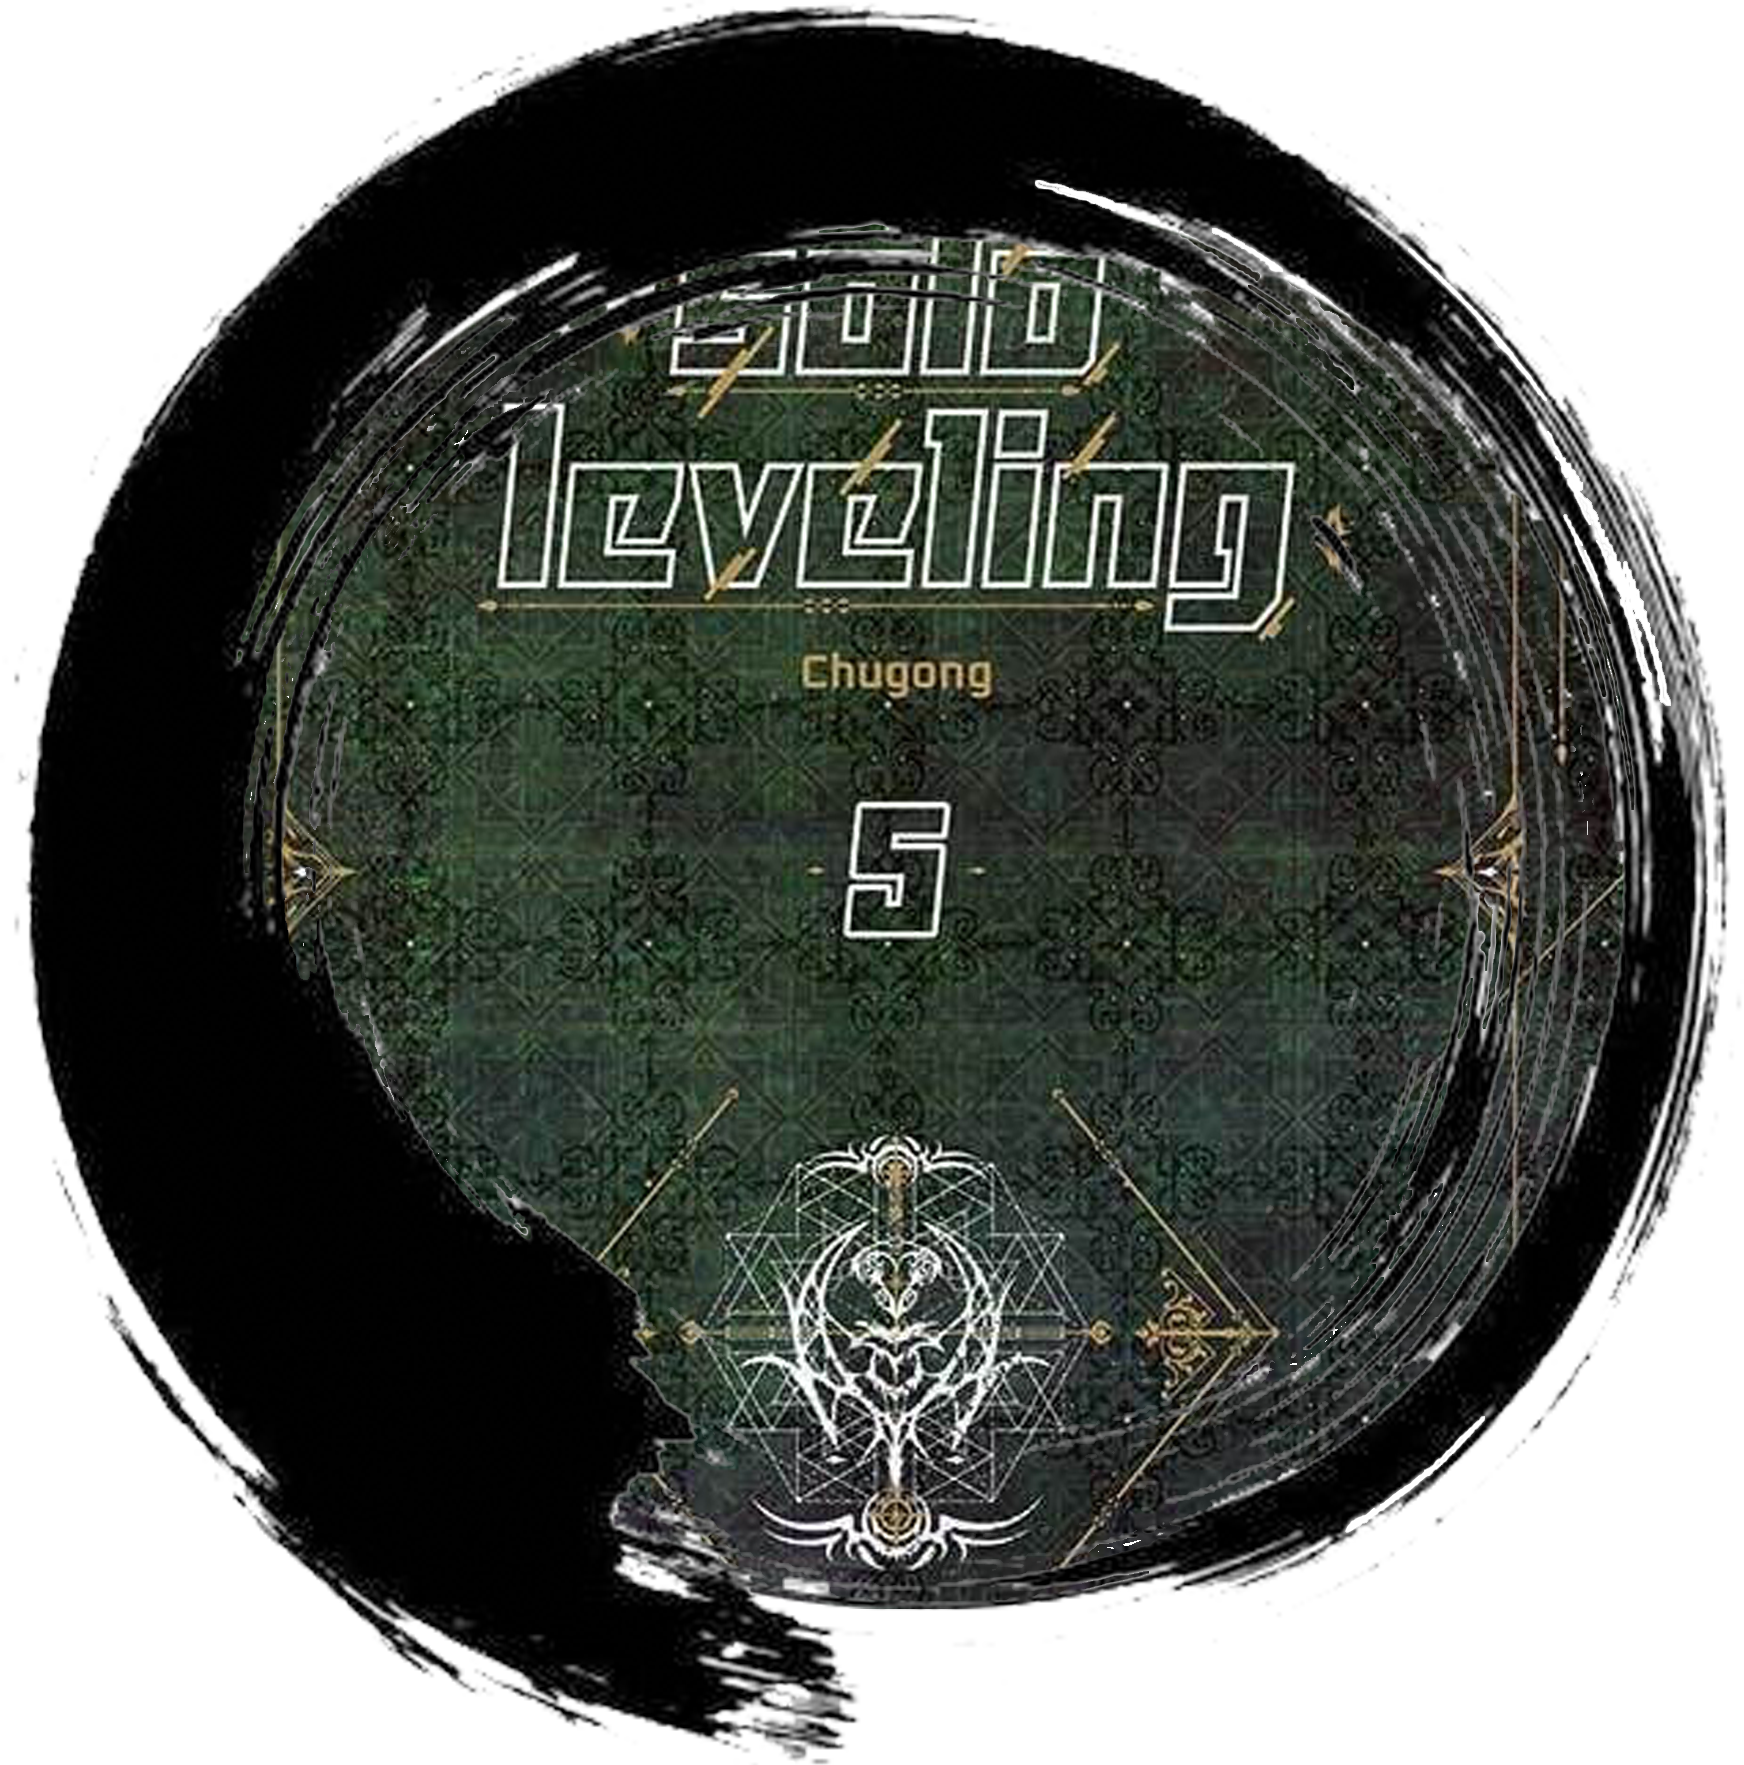 Solo Leveling #5